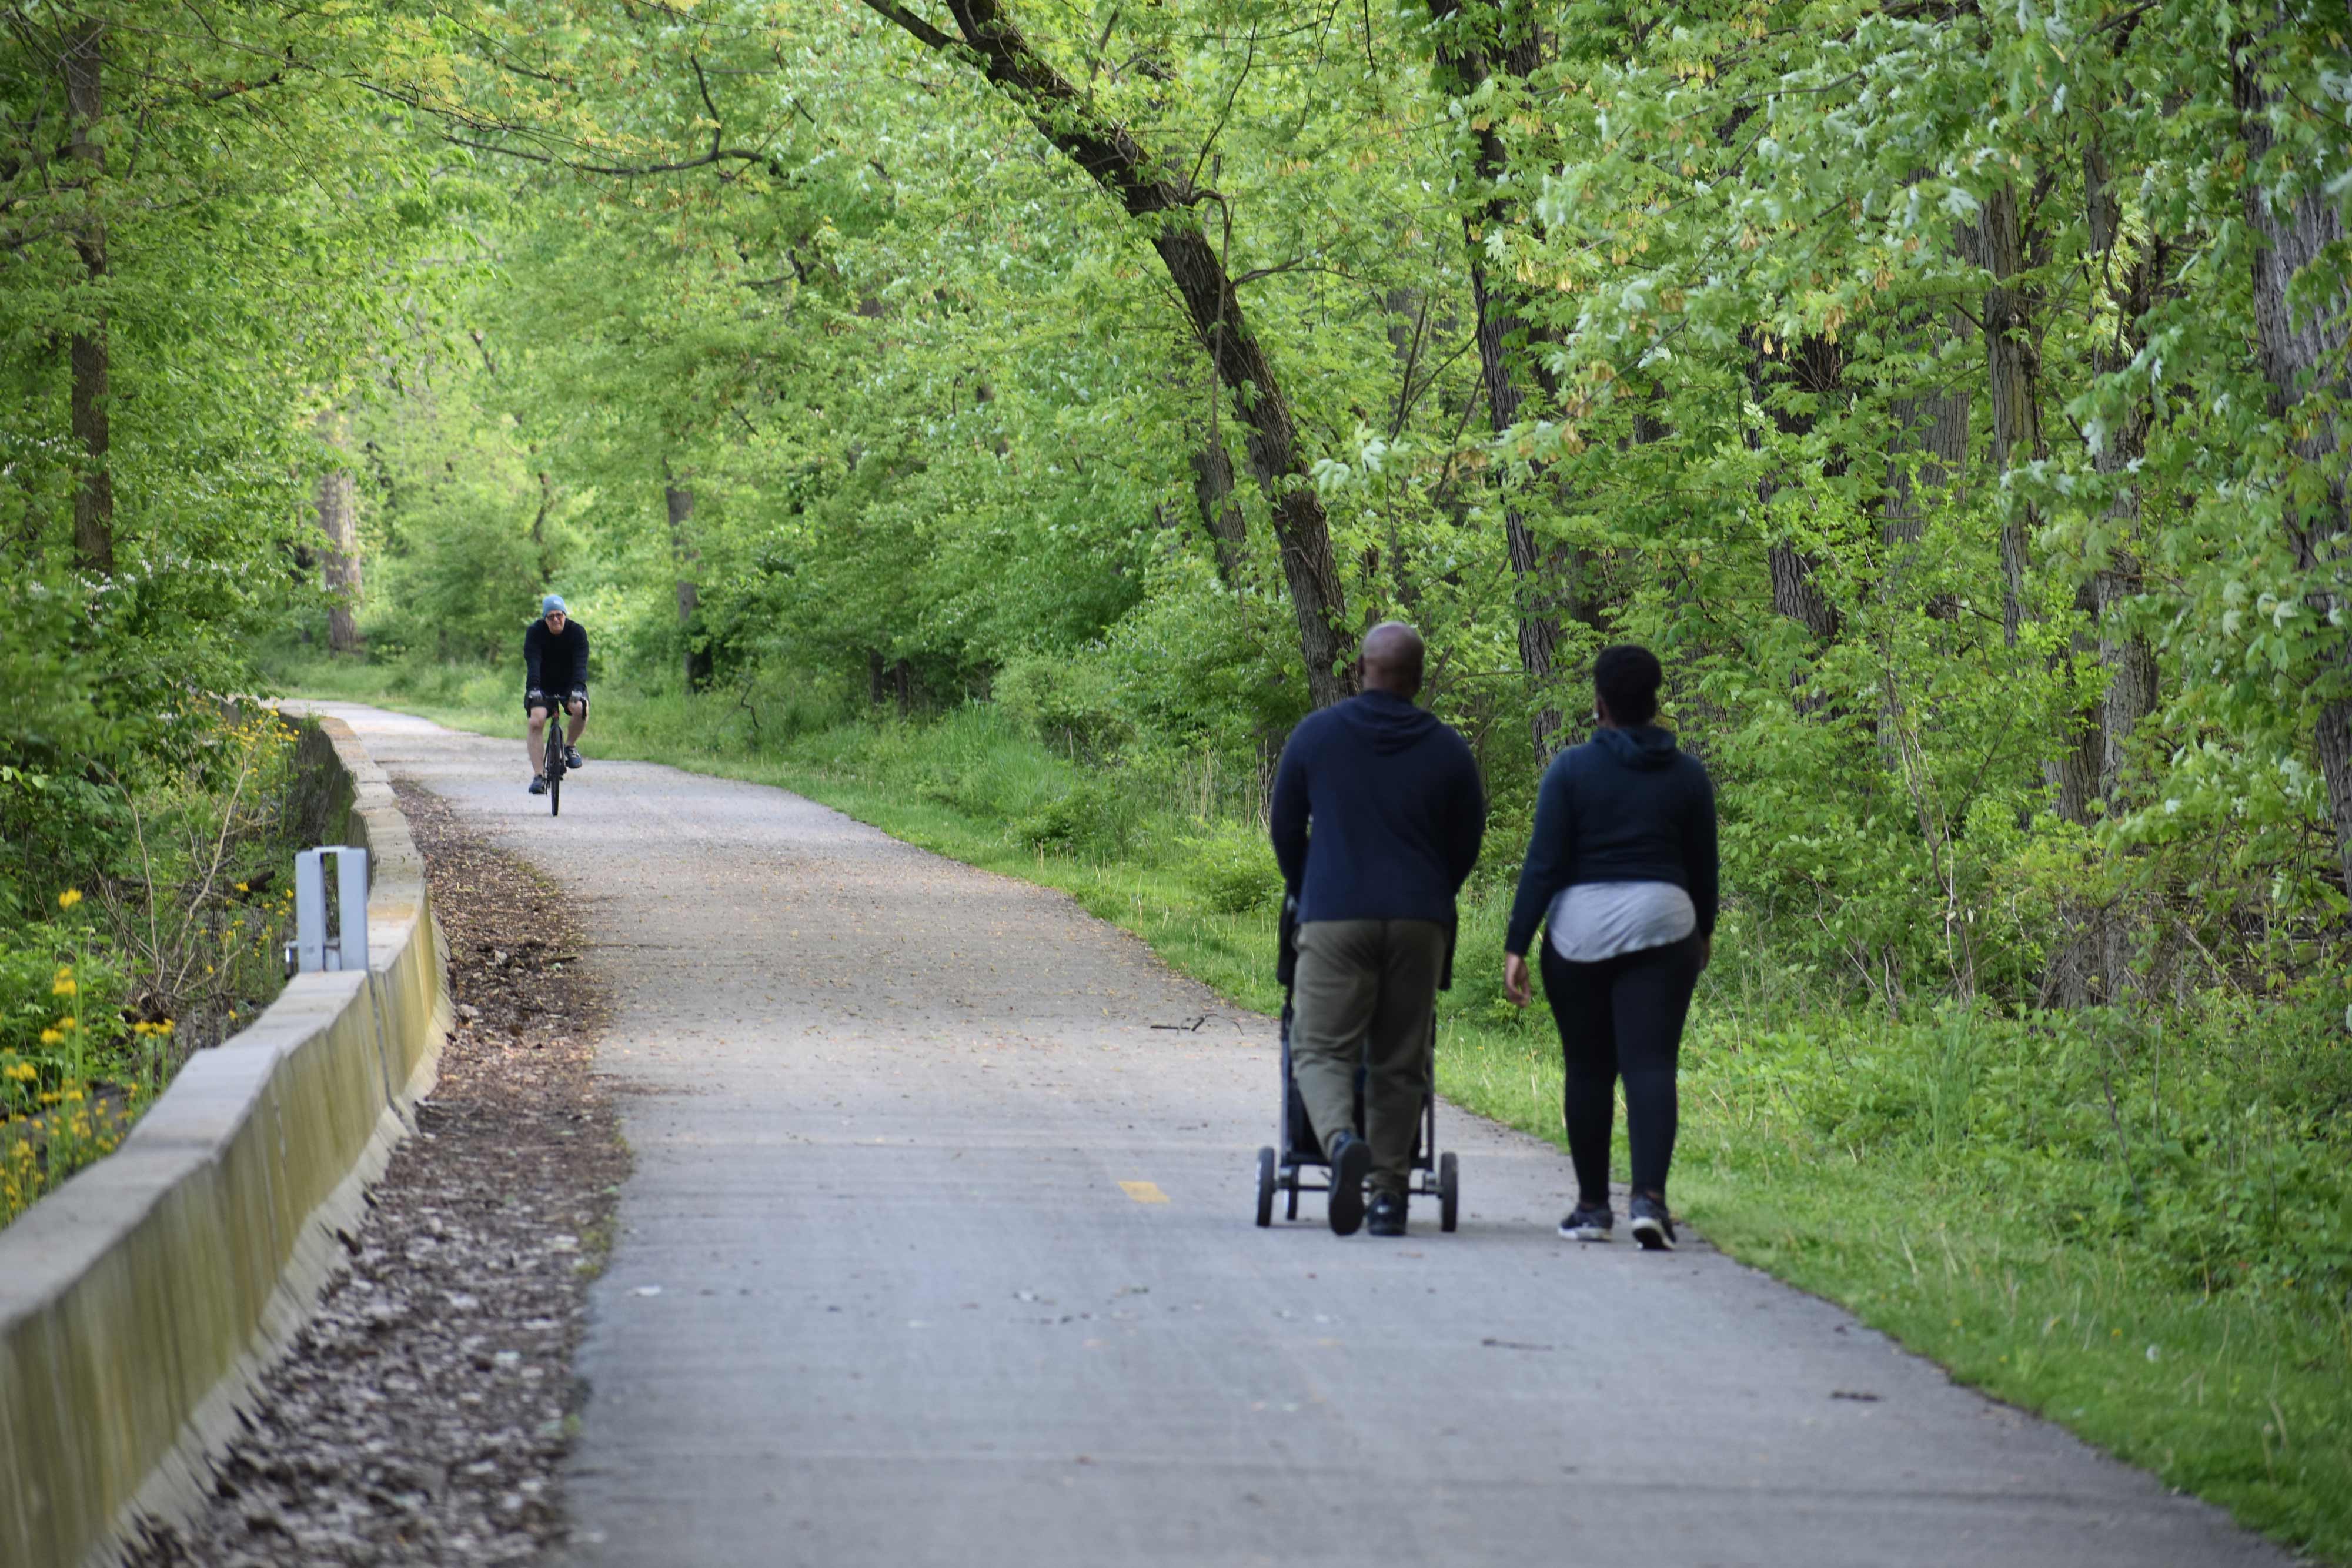 Trail users with a stroller.